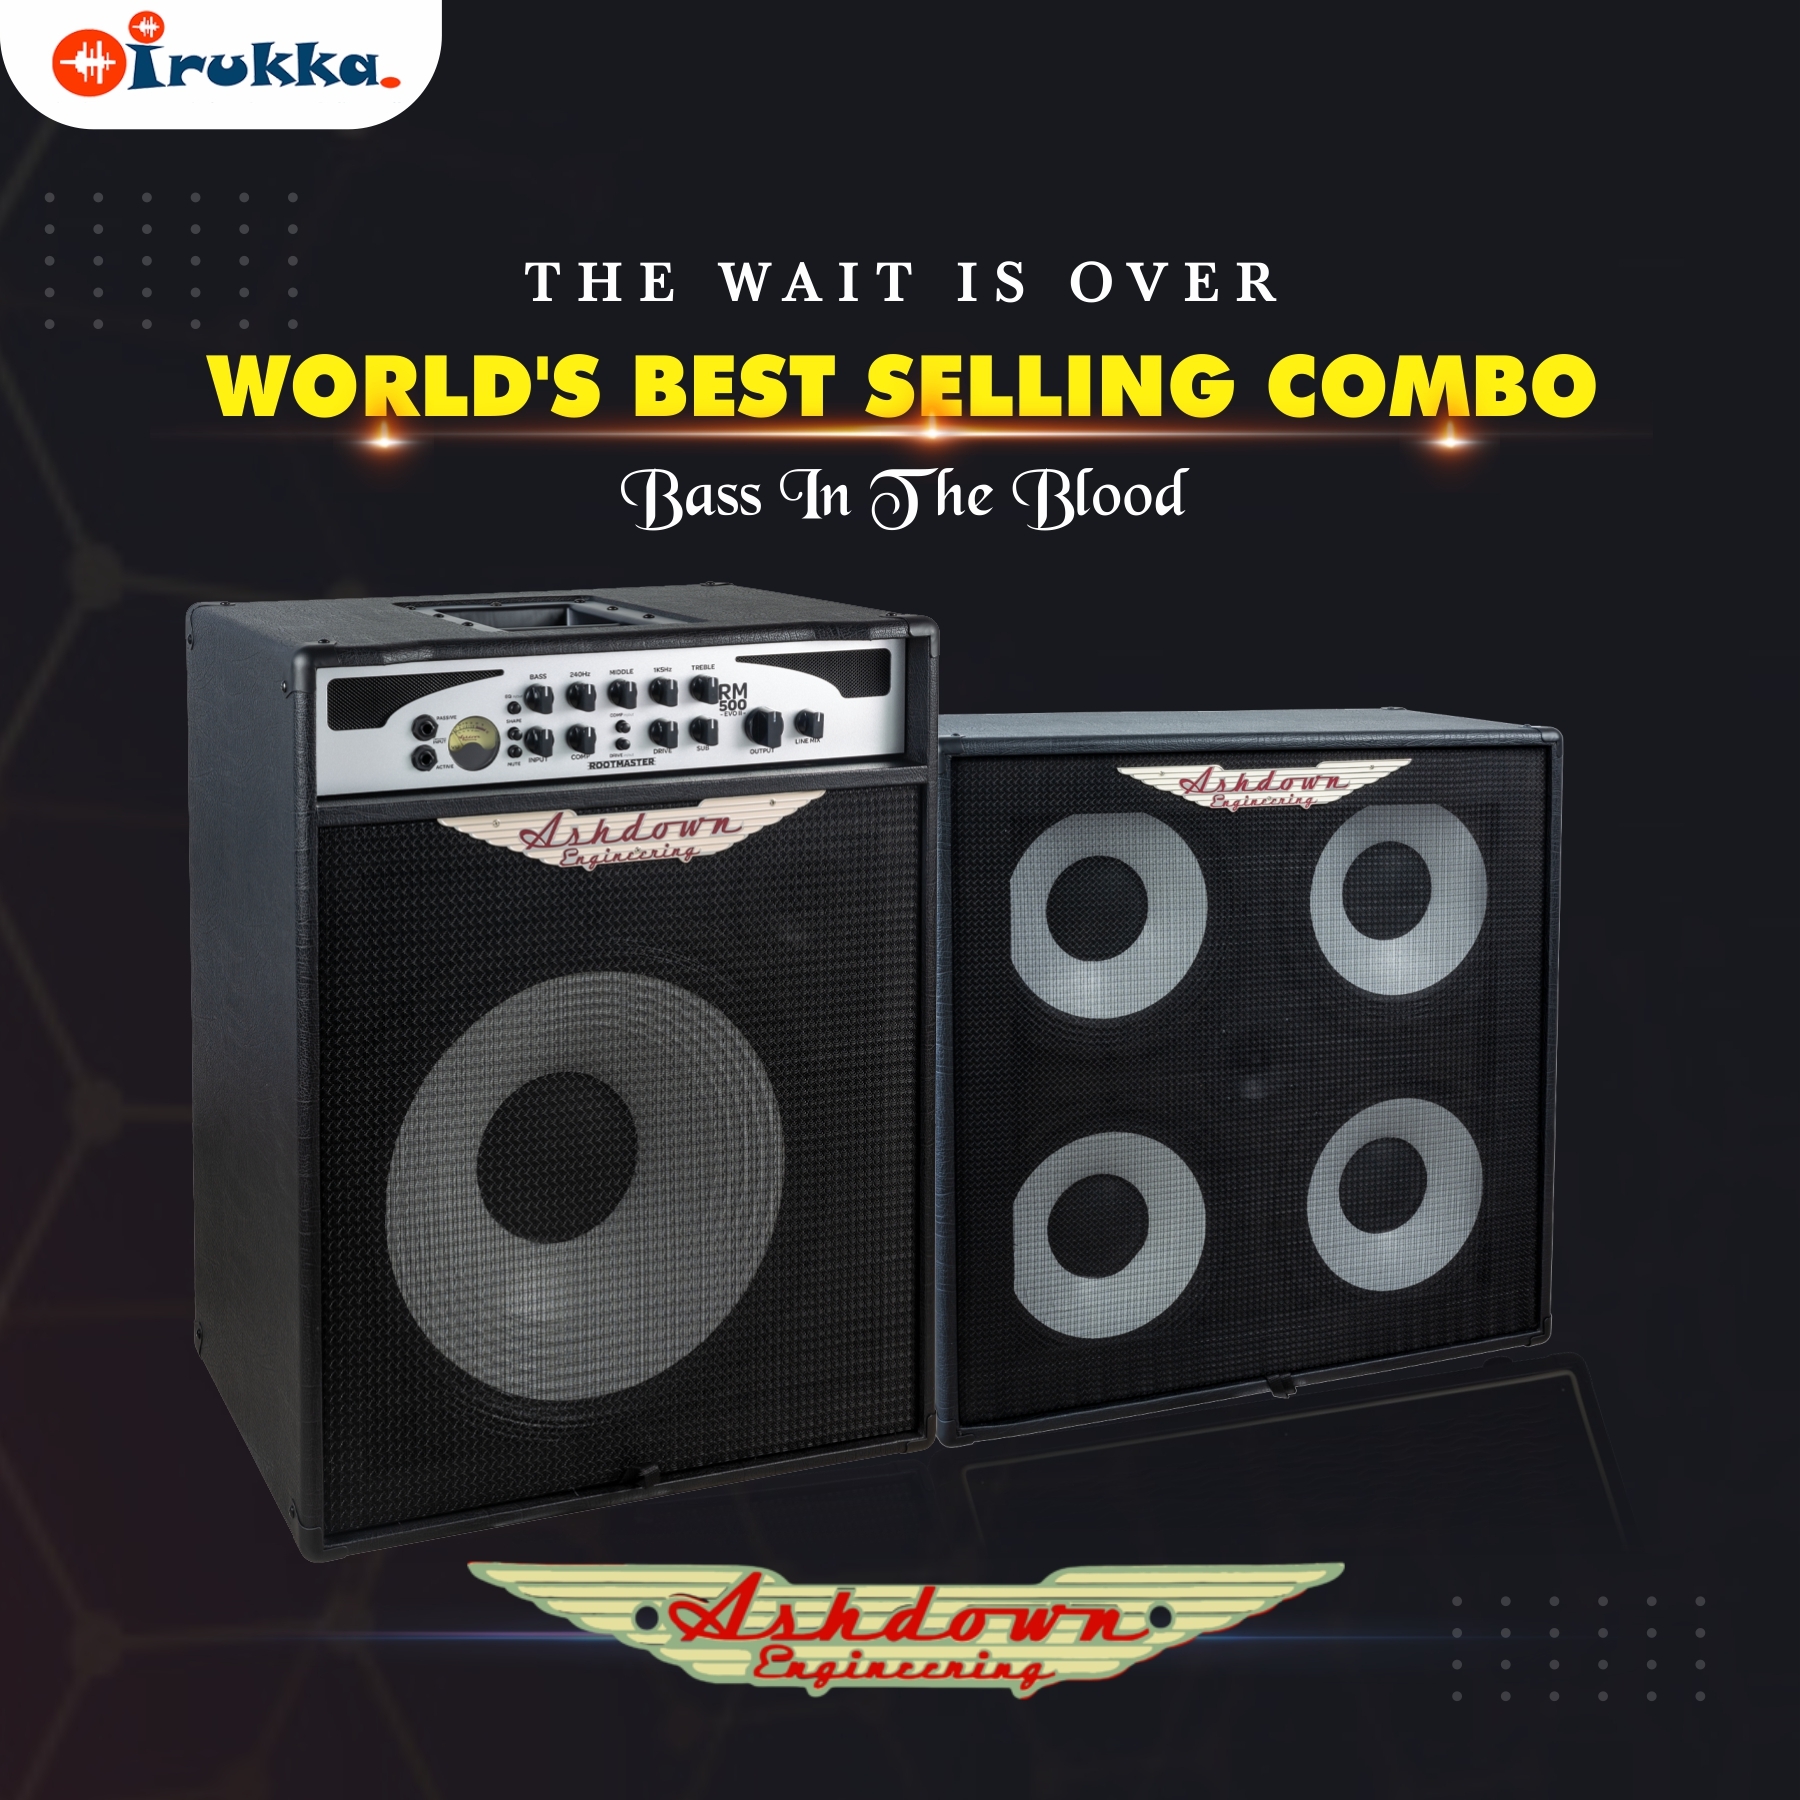 Shop and Buy ASHDOWN BASS COMBO now in Nigeria on Irukka